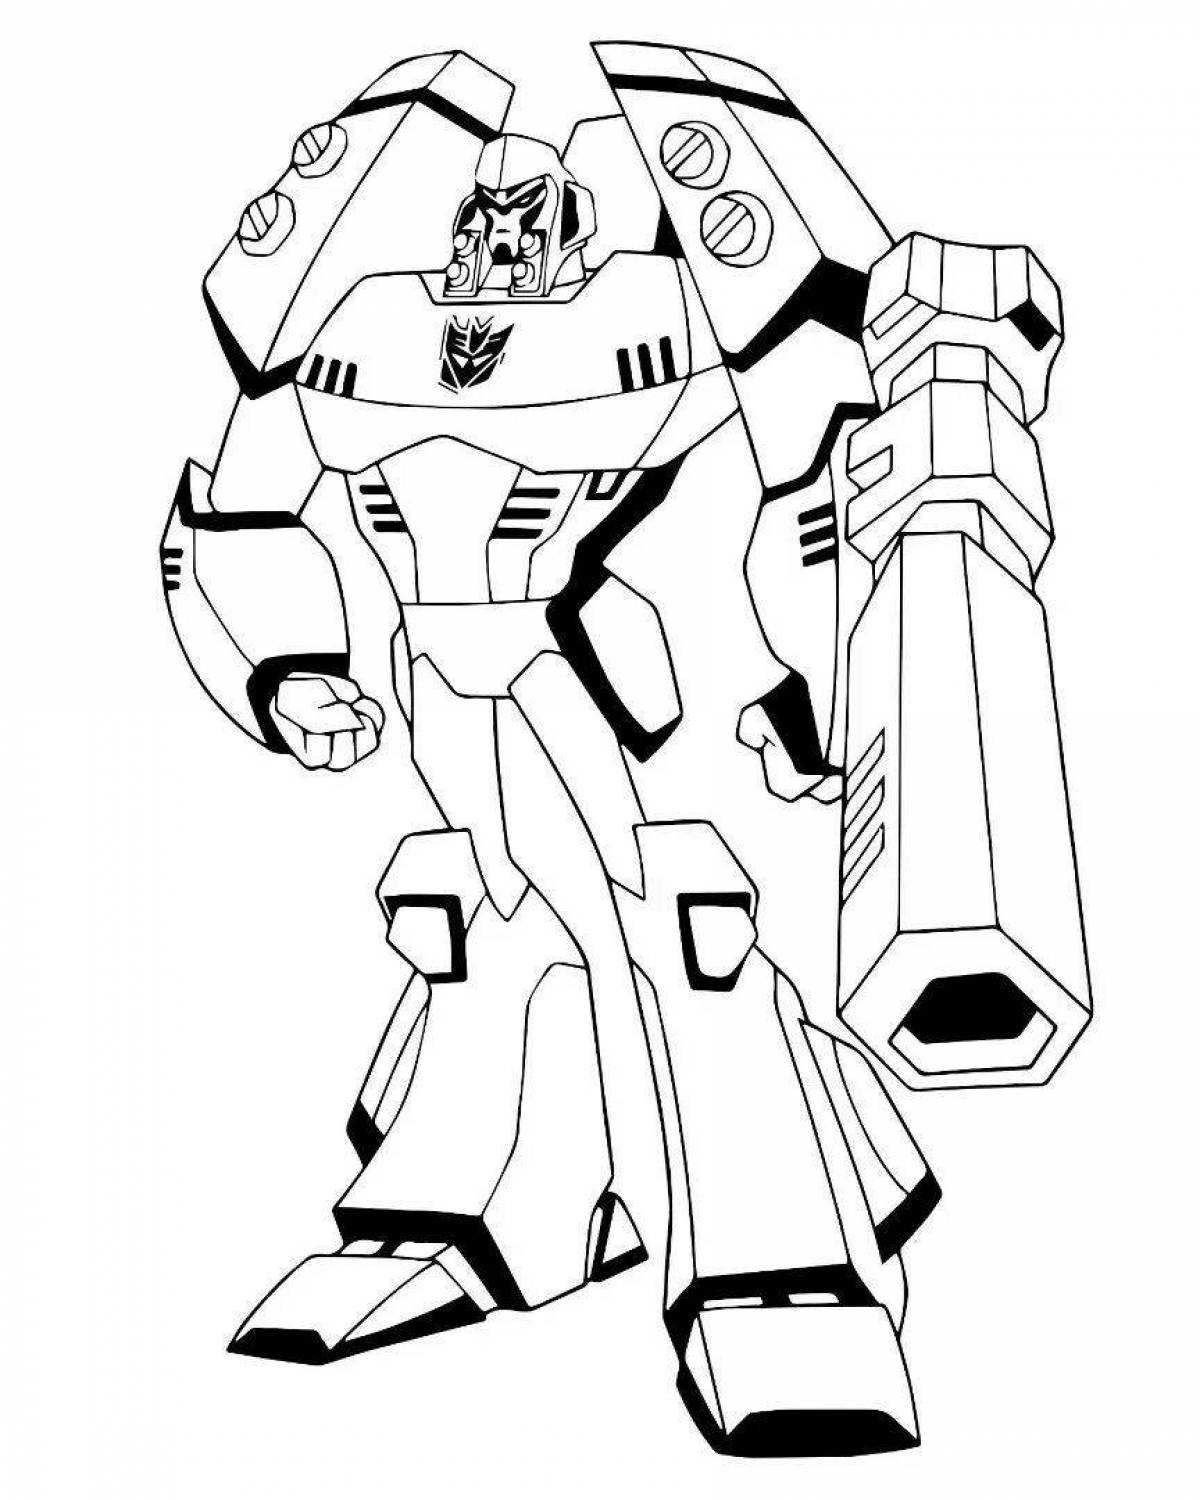 Coloring book charming tobot t